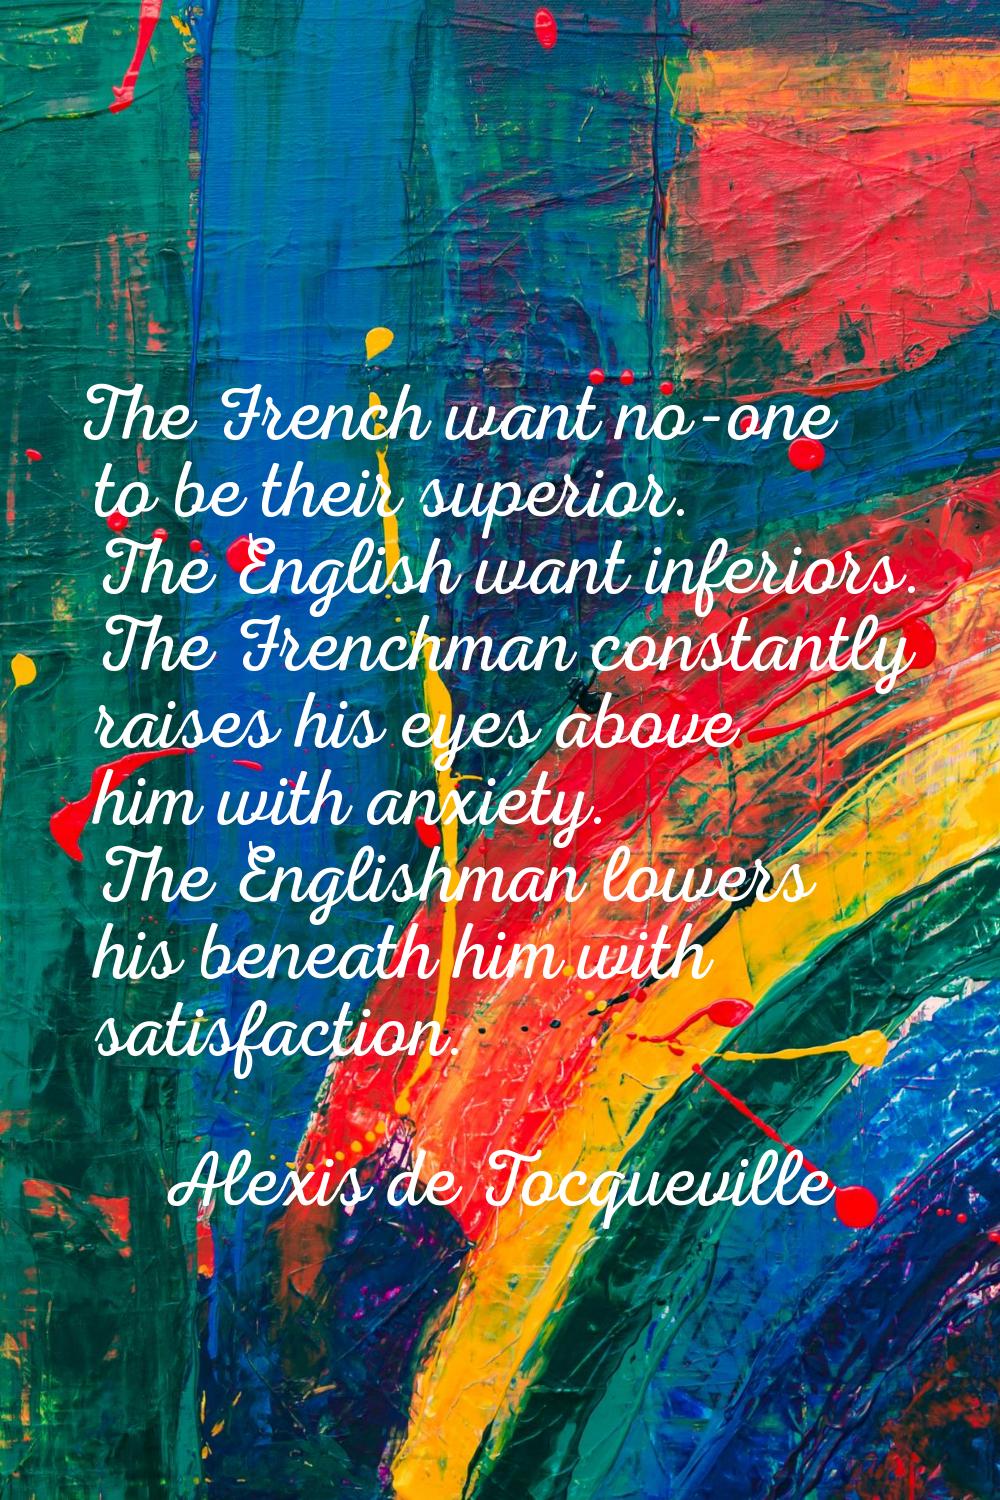 The French want no-one to be their superior. The English want inferiors. The Frenchman constantly r